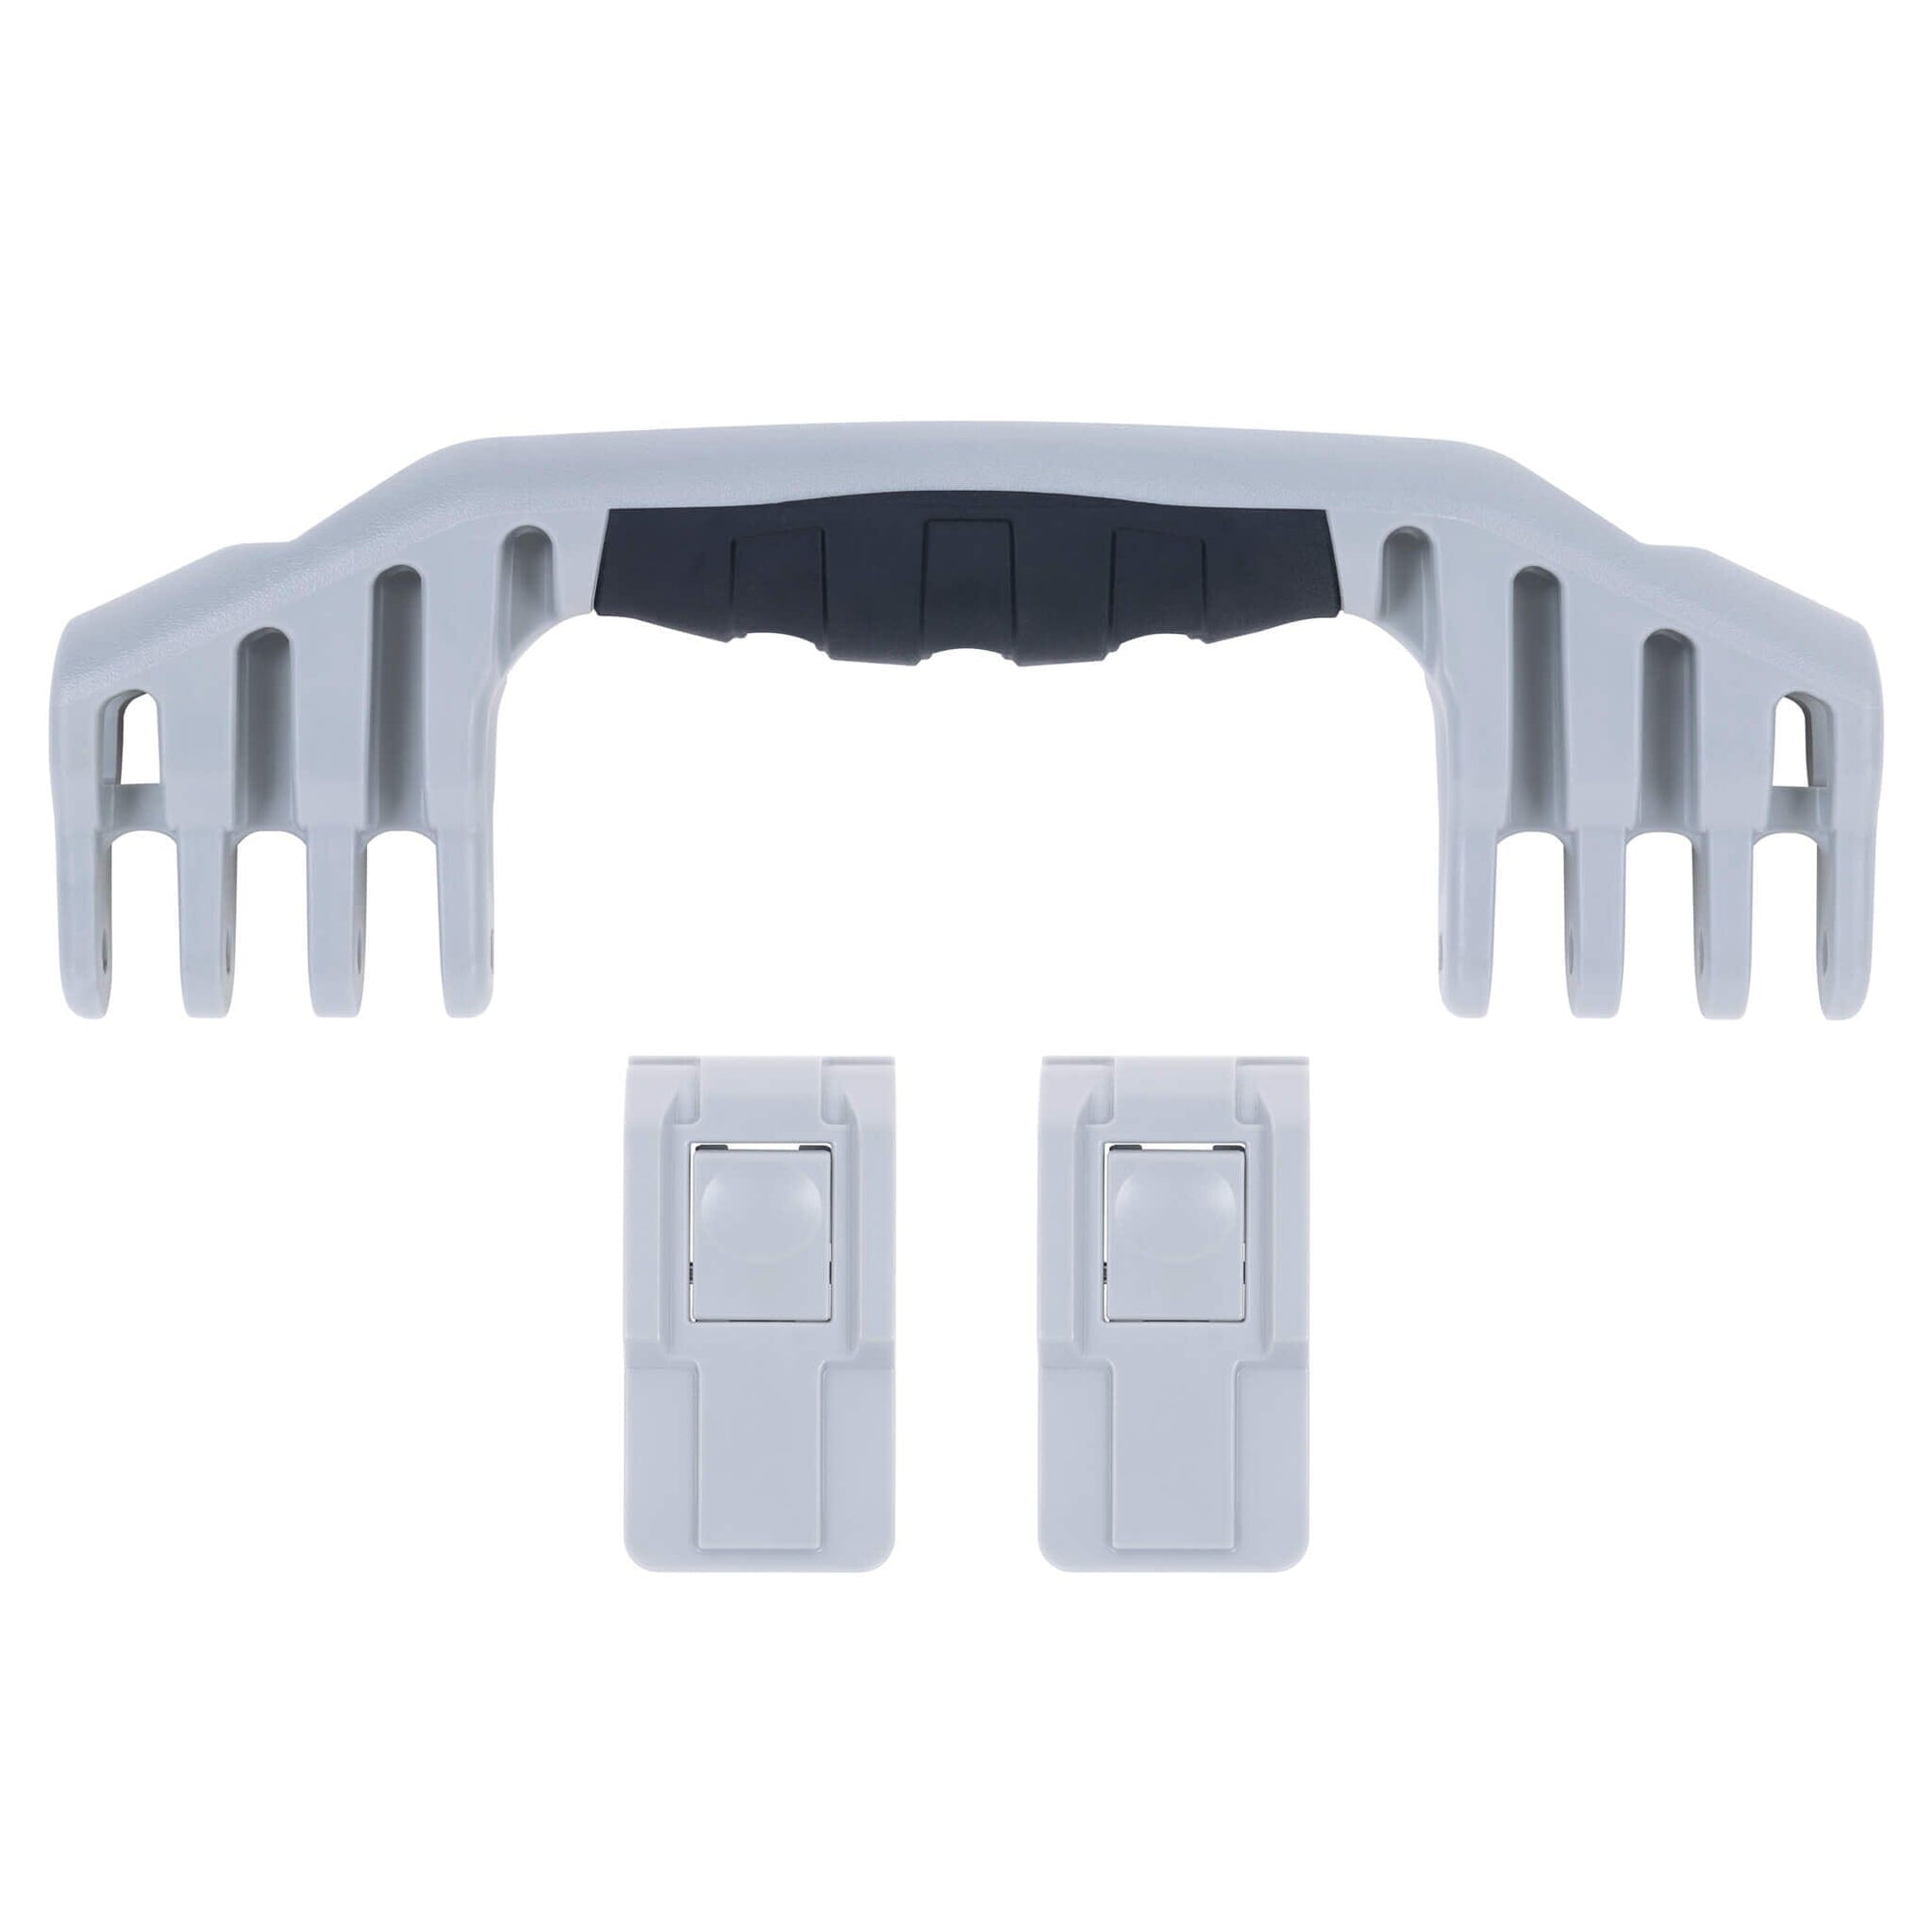 Pelican 1520 Replacement Handle & Latches, Silver, Push-Button (Set of 1 Handle, 2 Latches) ColorCase 